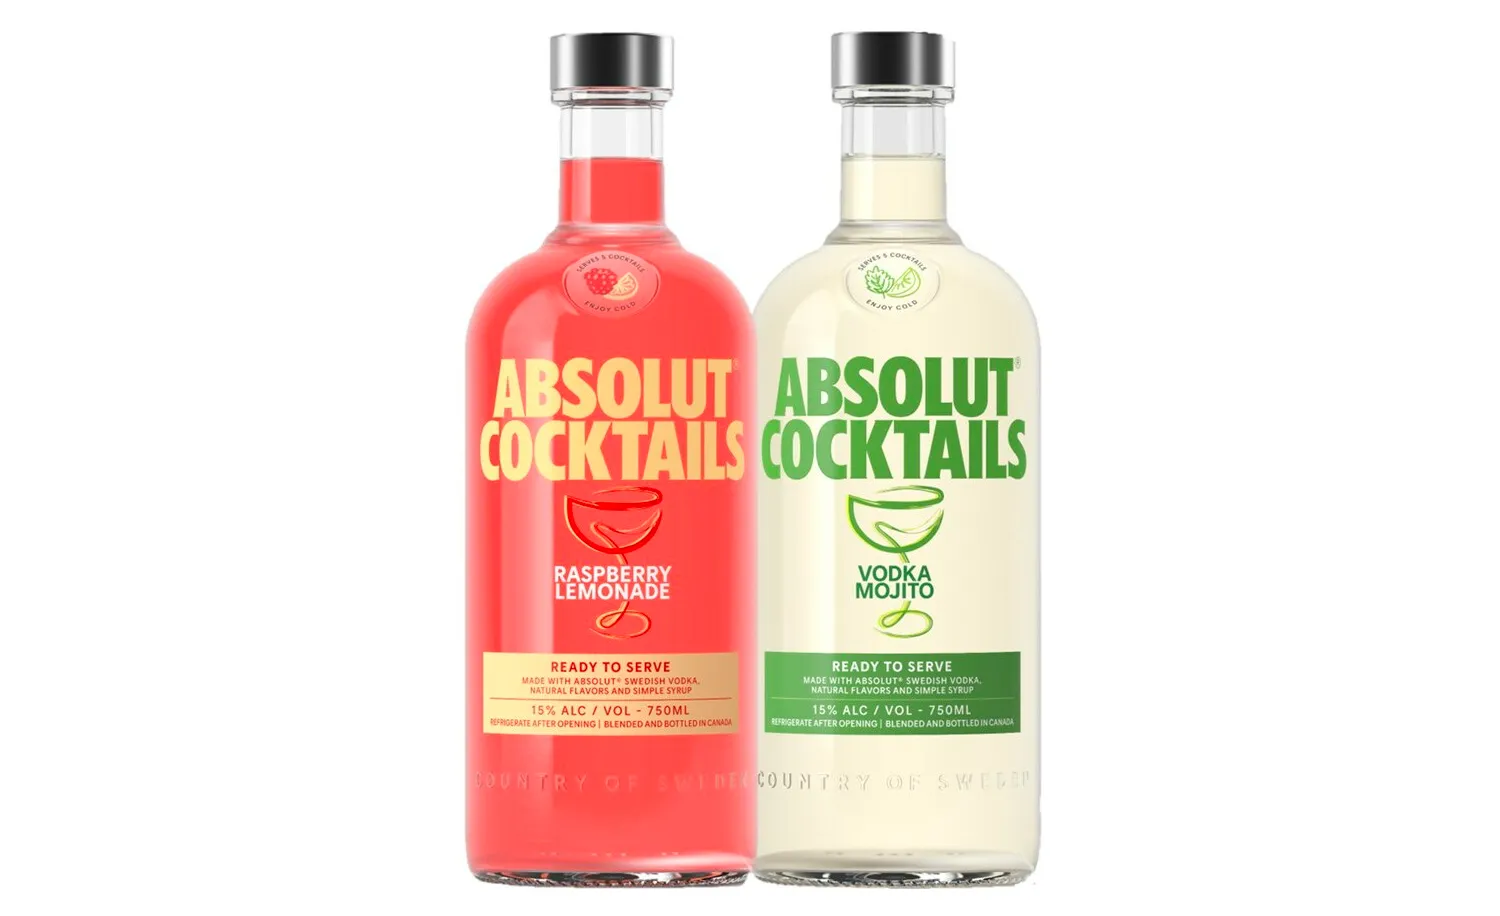 Absolut enters into the ready-to-serve category